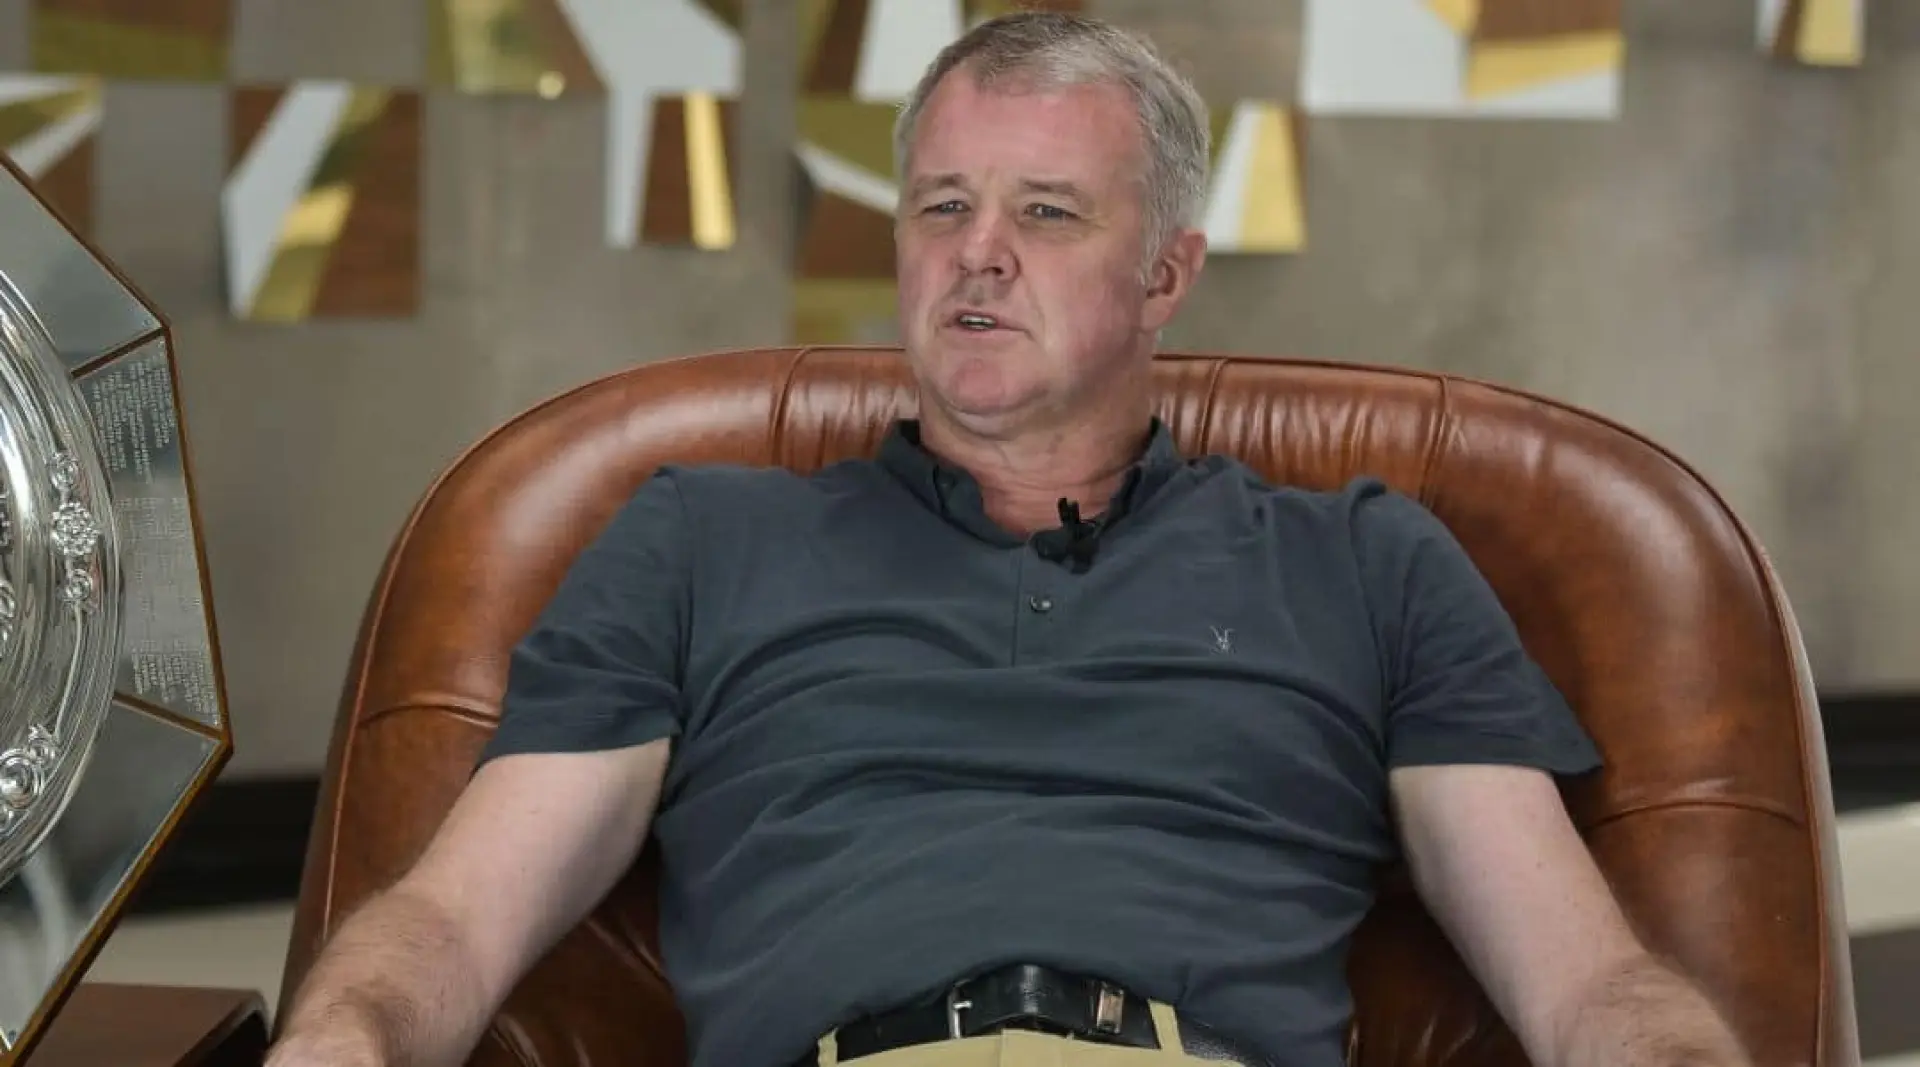 Gary Pallister - FA launch to mark Ladbrokes as official betting partner